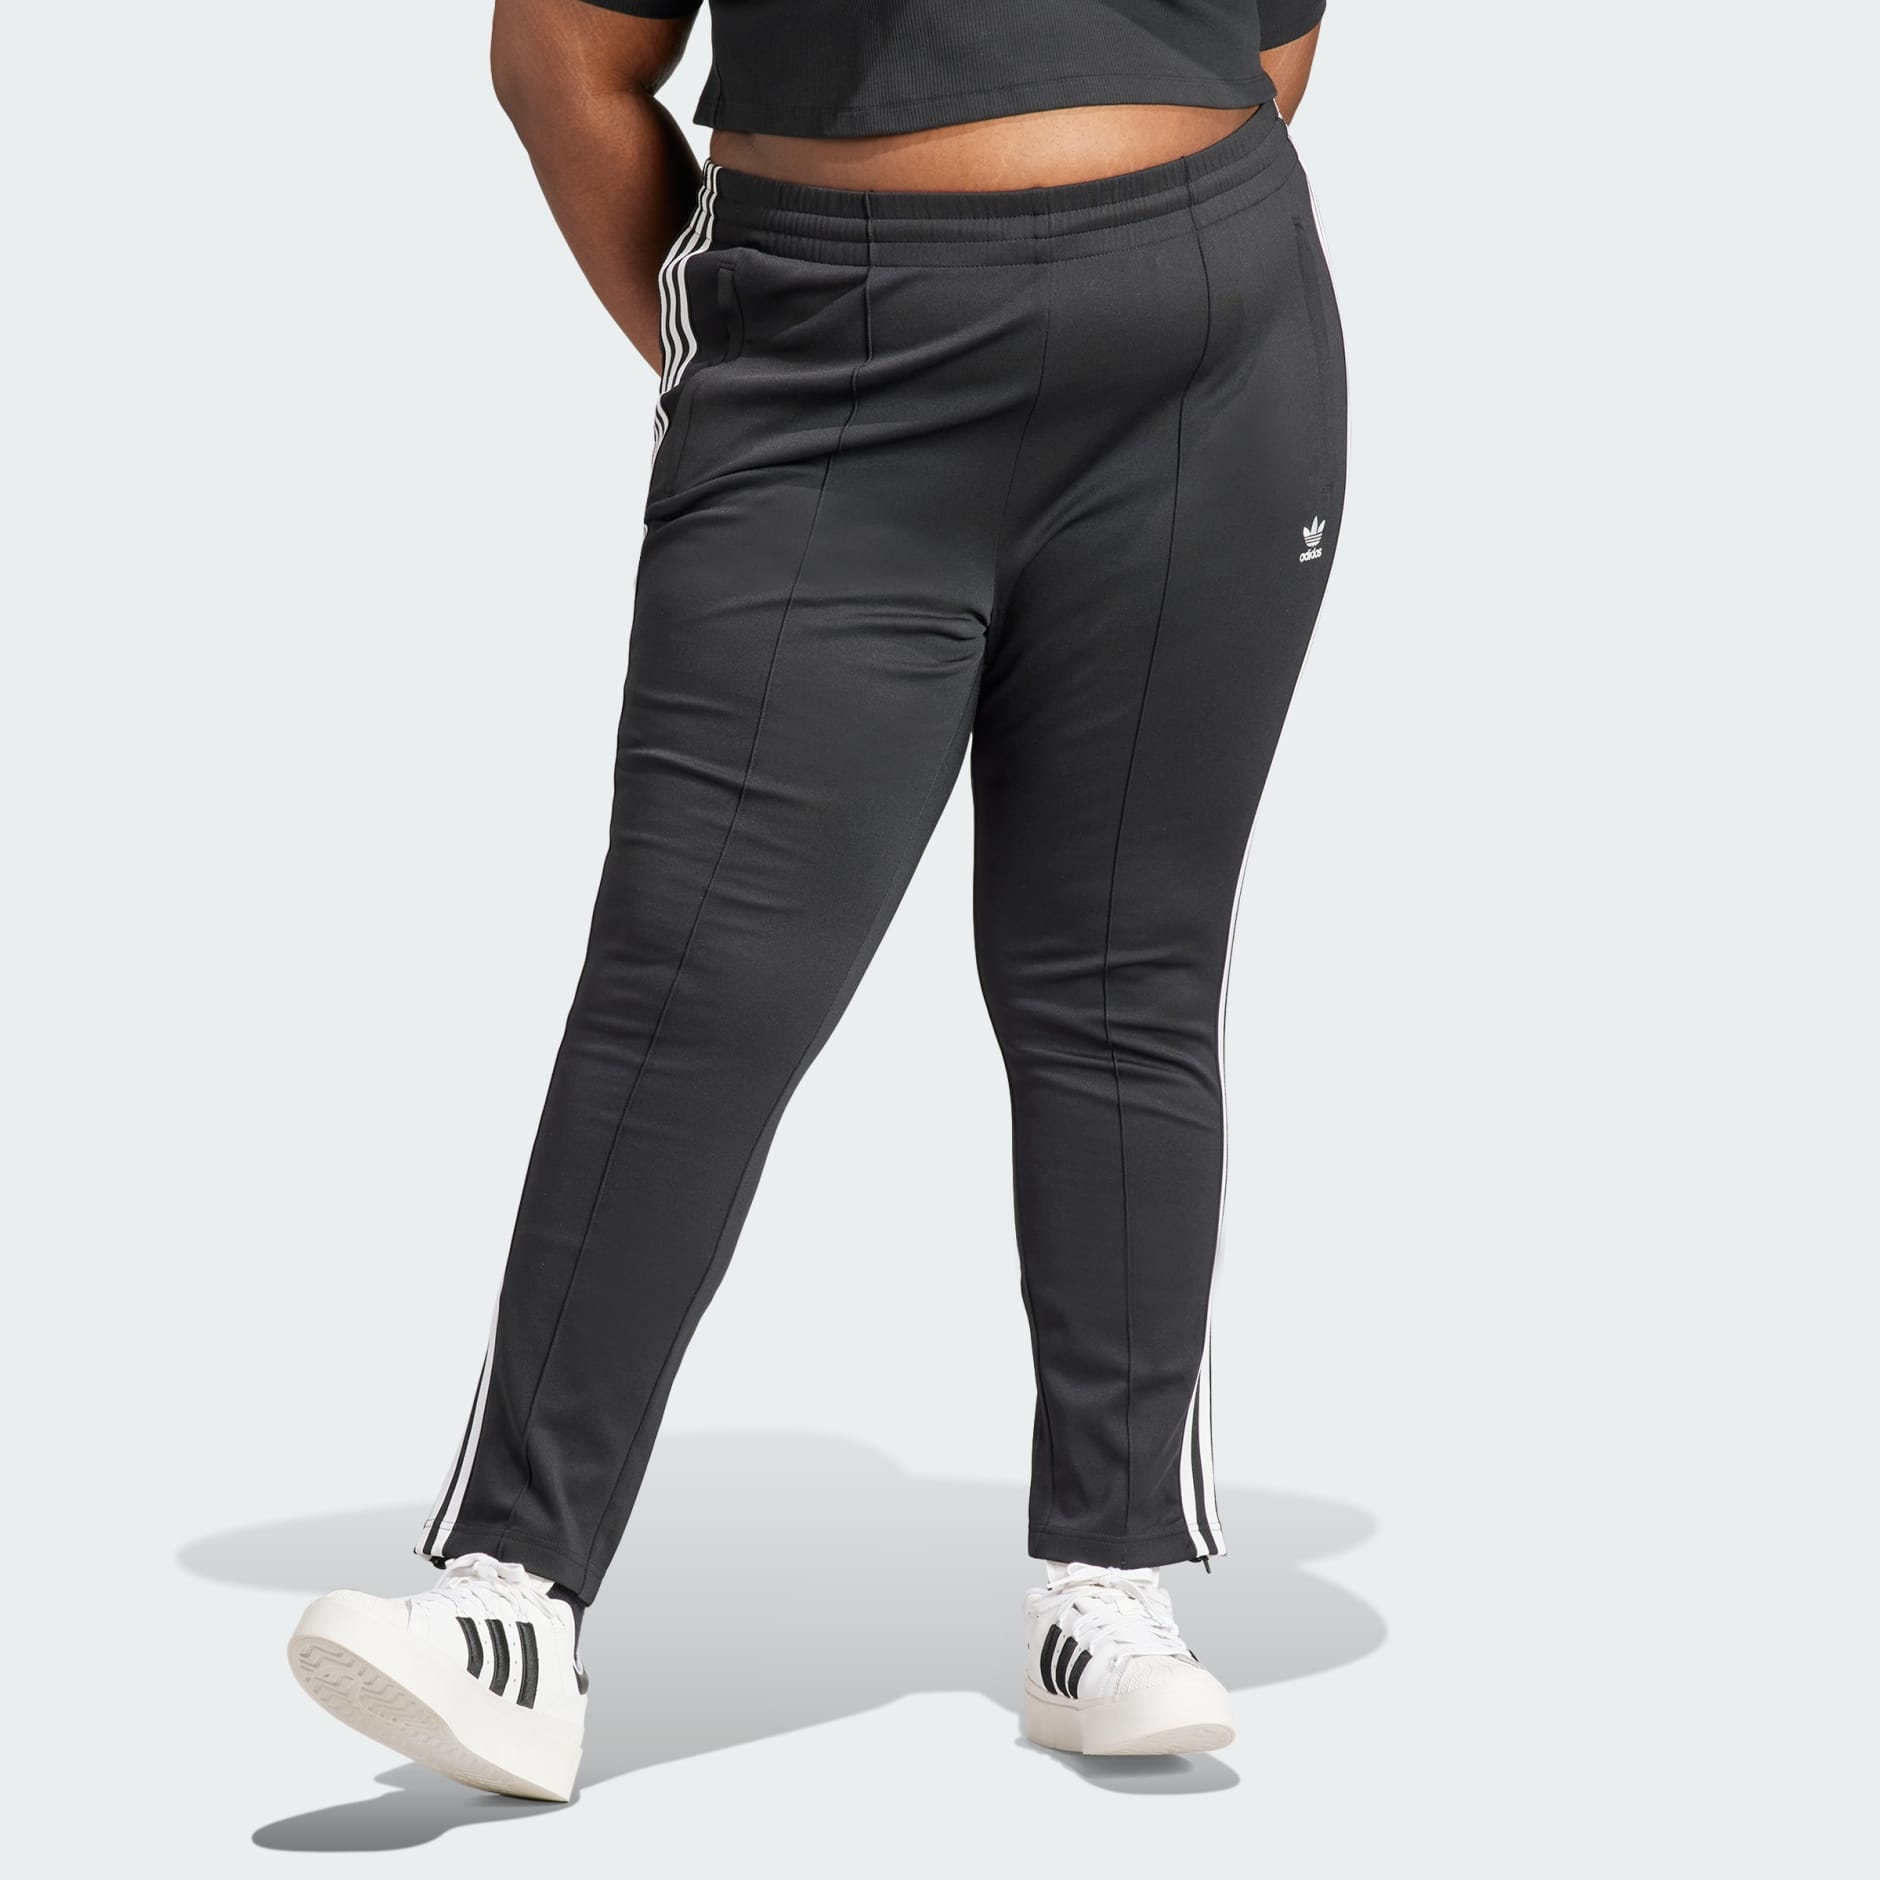 Adidas Originals Women's Track Pants - Womens Clothing from